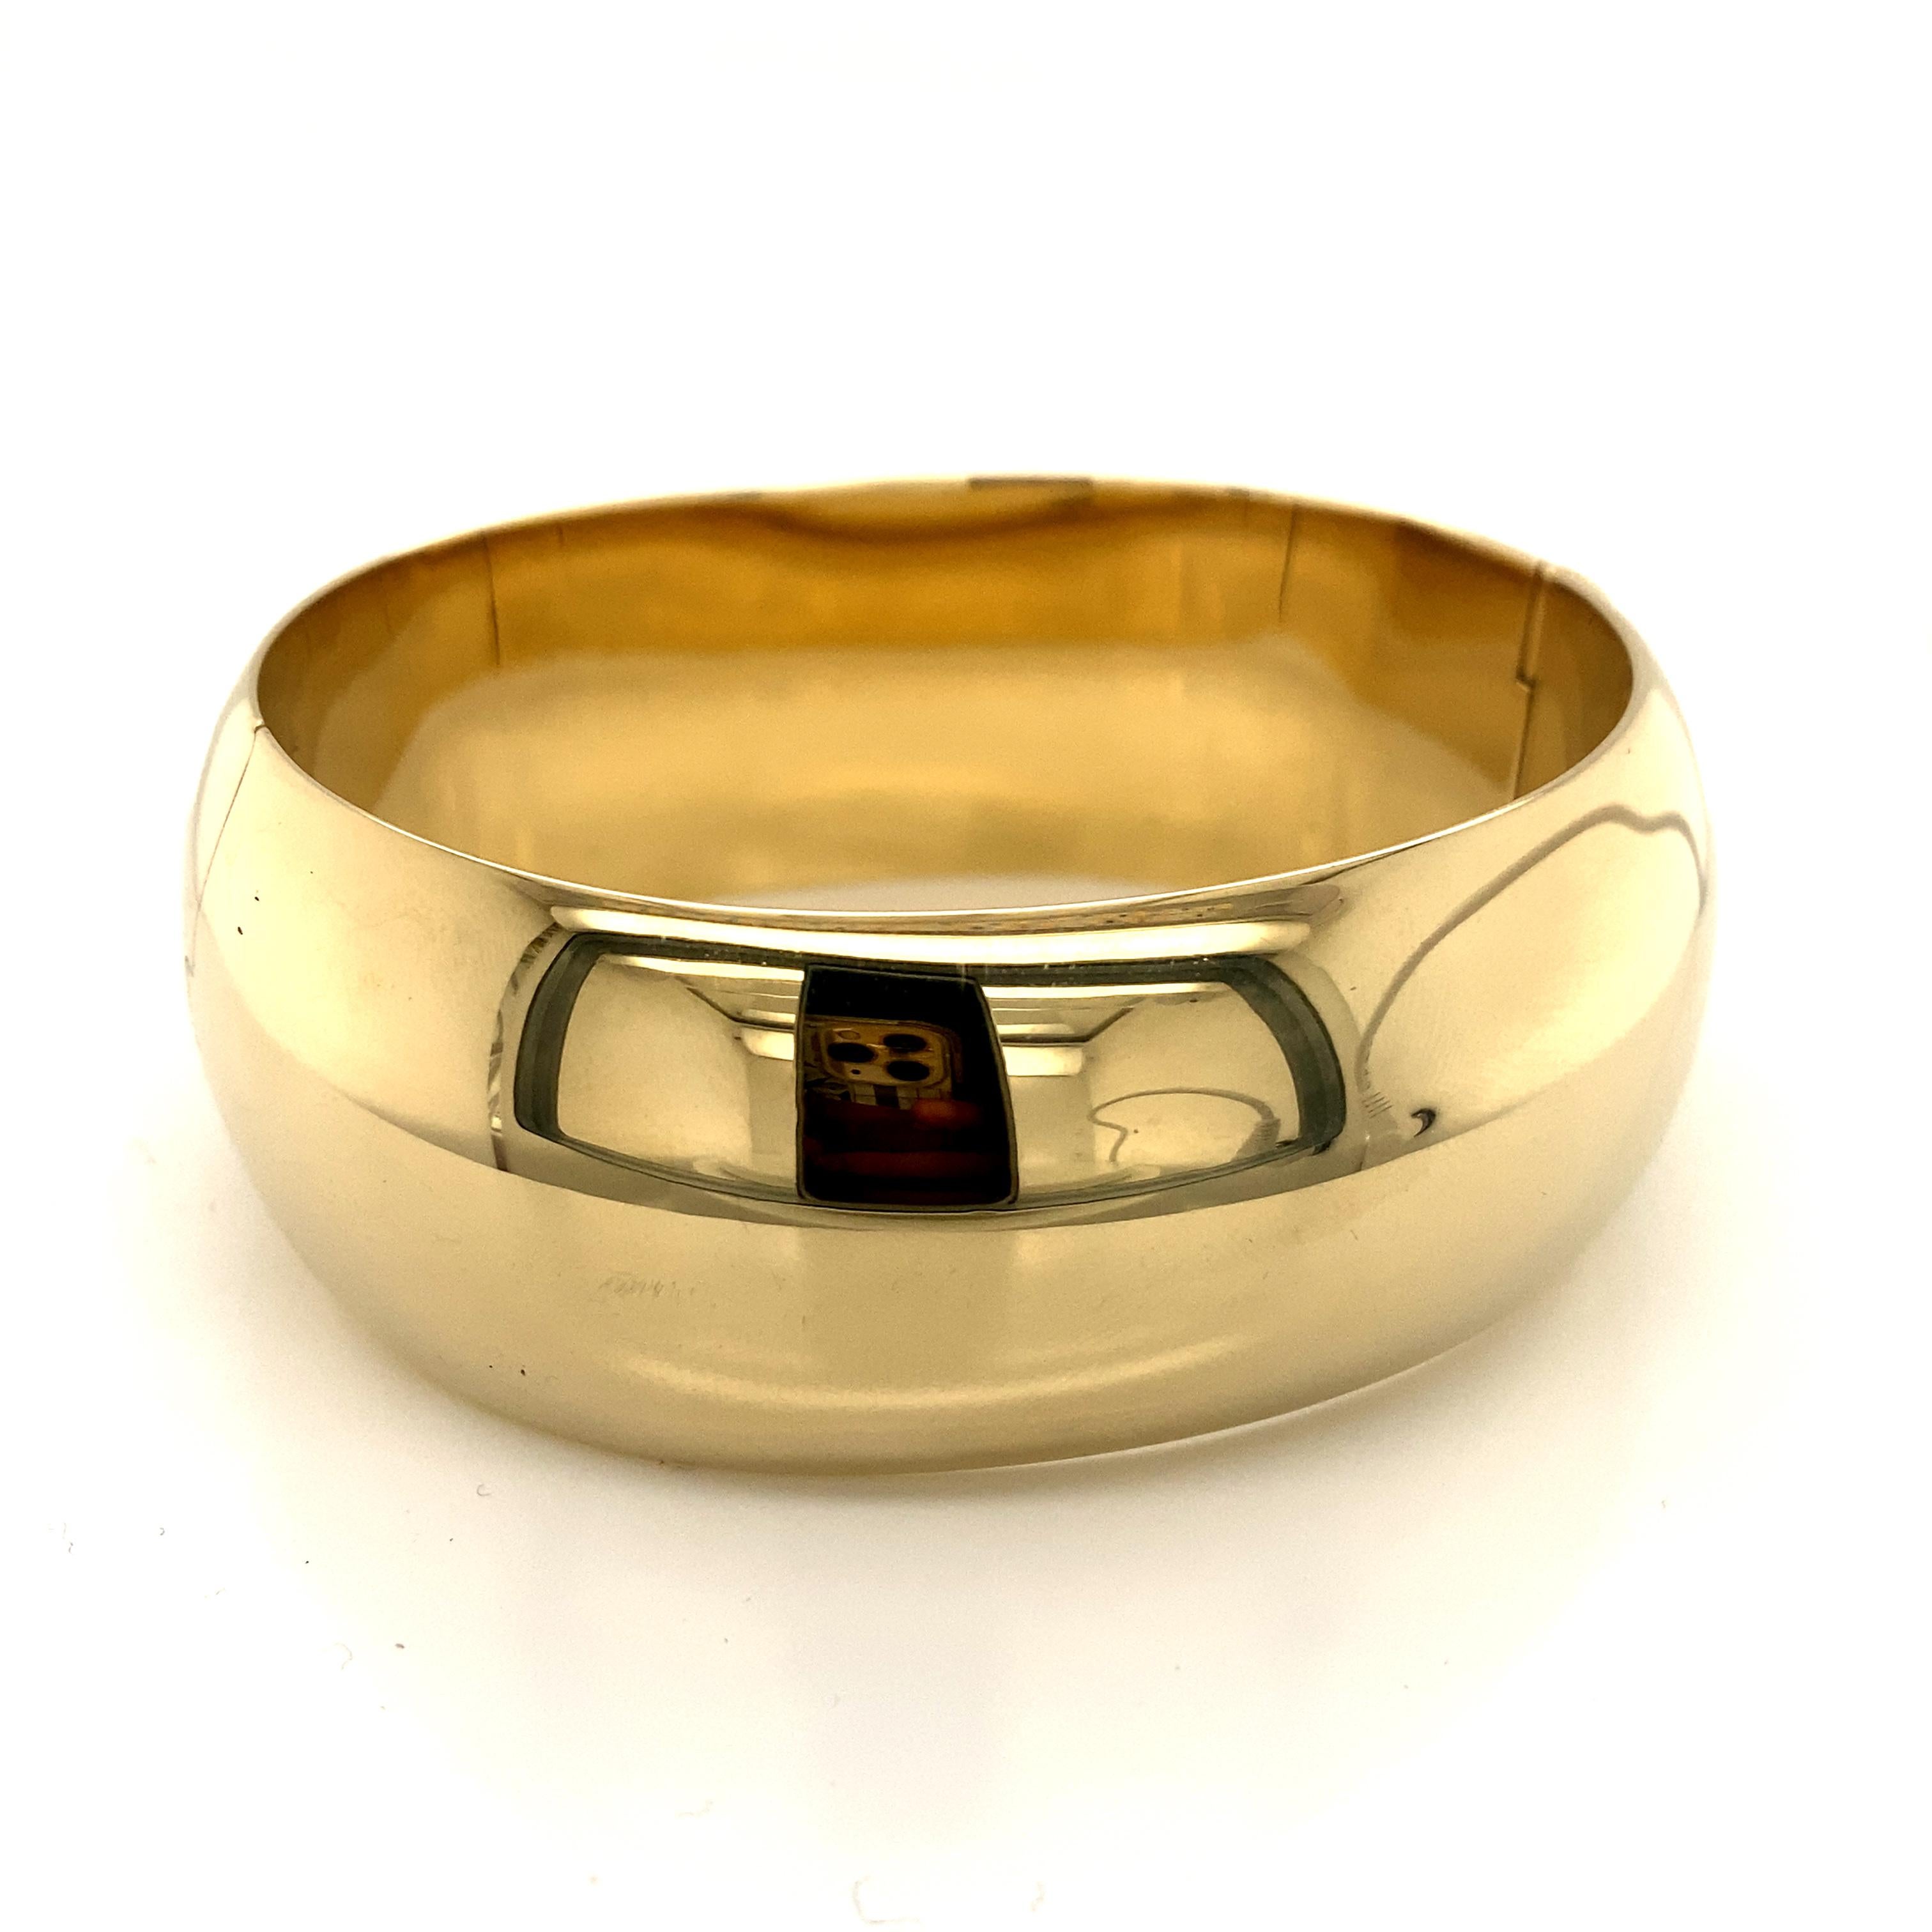 This stunning vintage bangle bracelet from the 1990s is a true statement piece that exudes timeless elegance and luxurious appeal. Crafted from solid 14k yellow gold, it showcases the enduring allure of classic gold jewelry.

The bracelet's striking